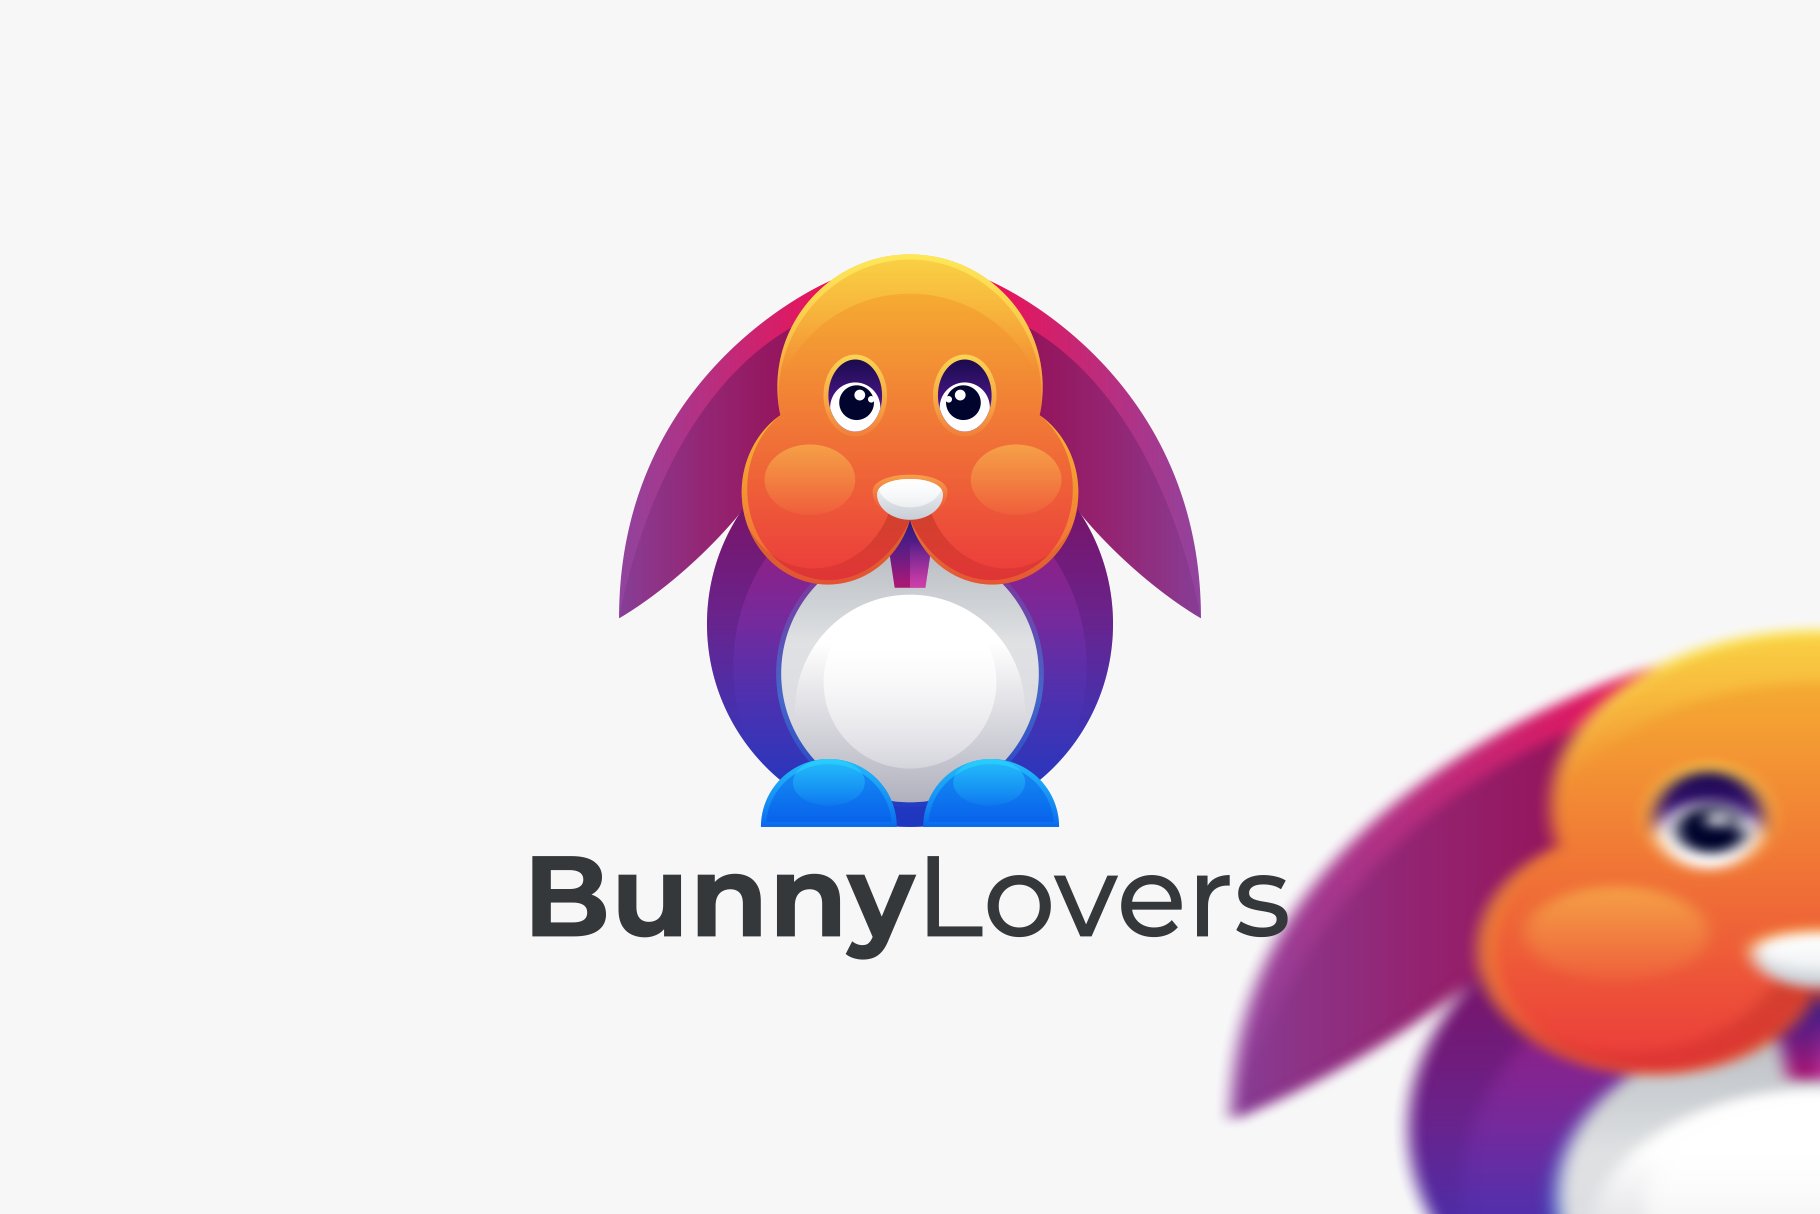 Bunny Lovers Gradient Color Logo cover image.